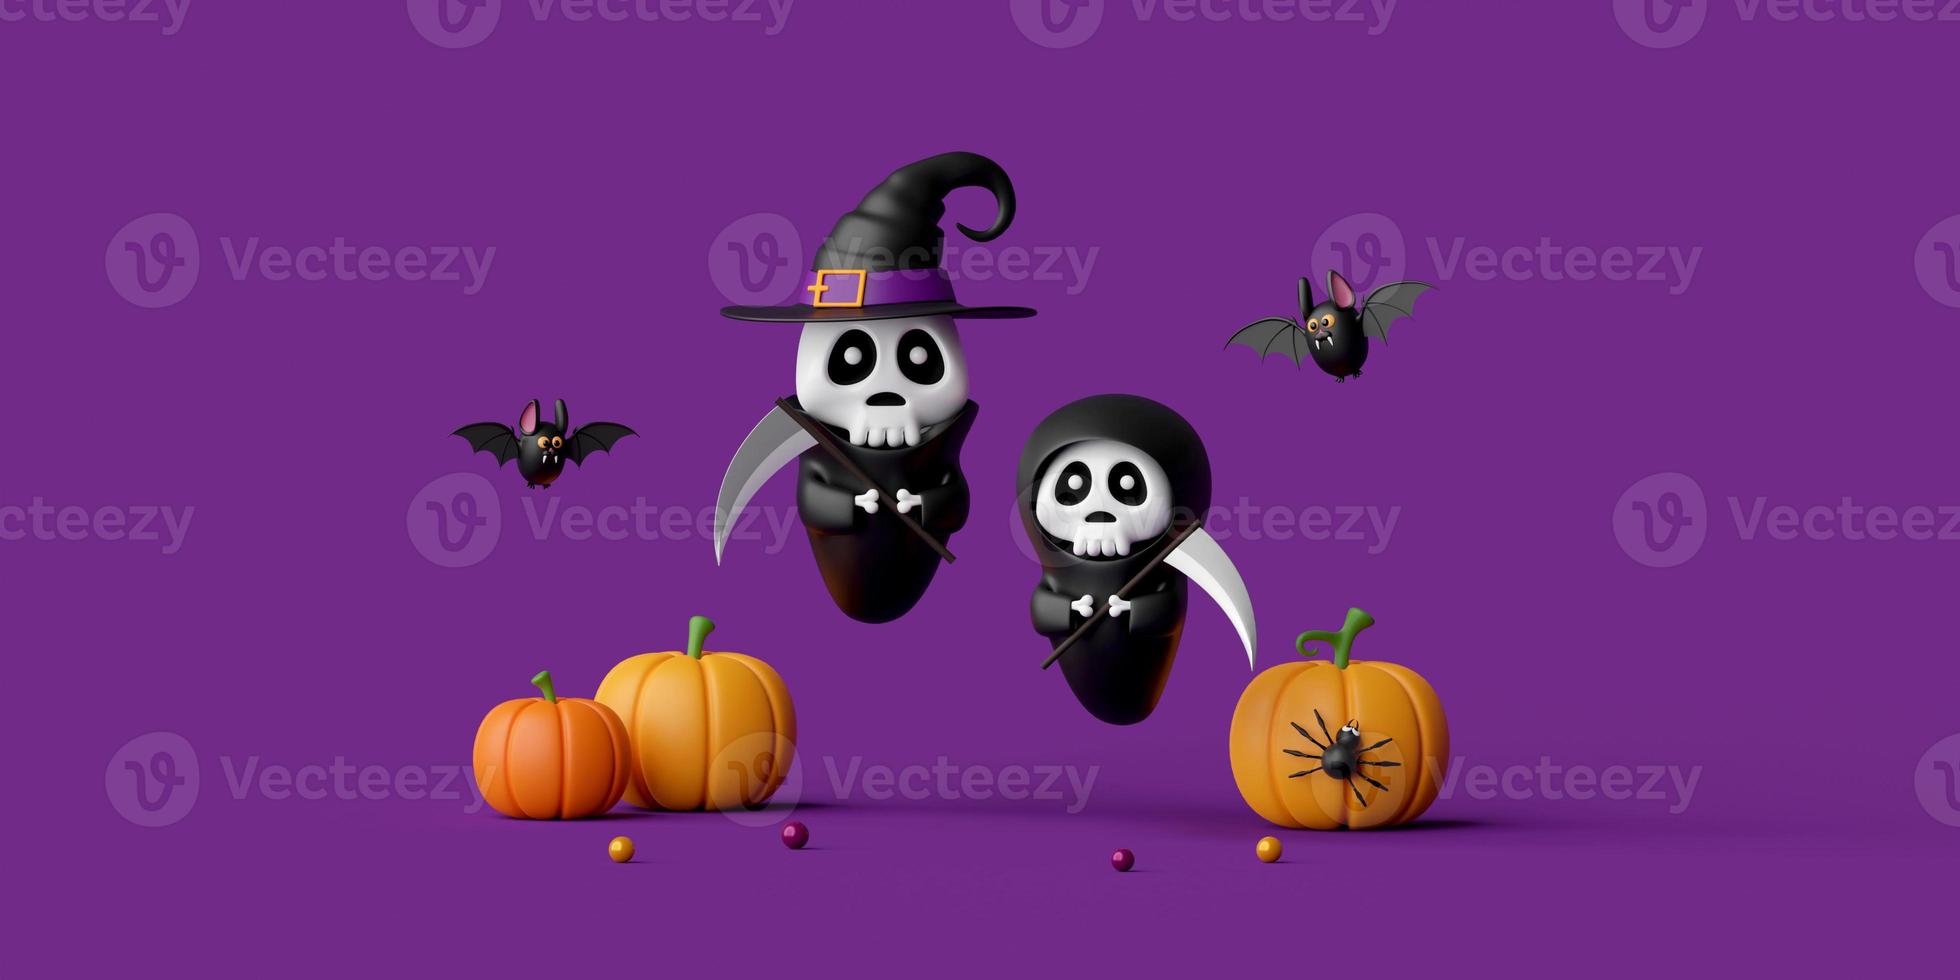 3d illustration of Happy Halloween scary ghost with pumpkins photo